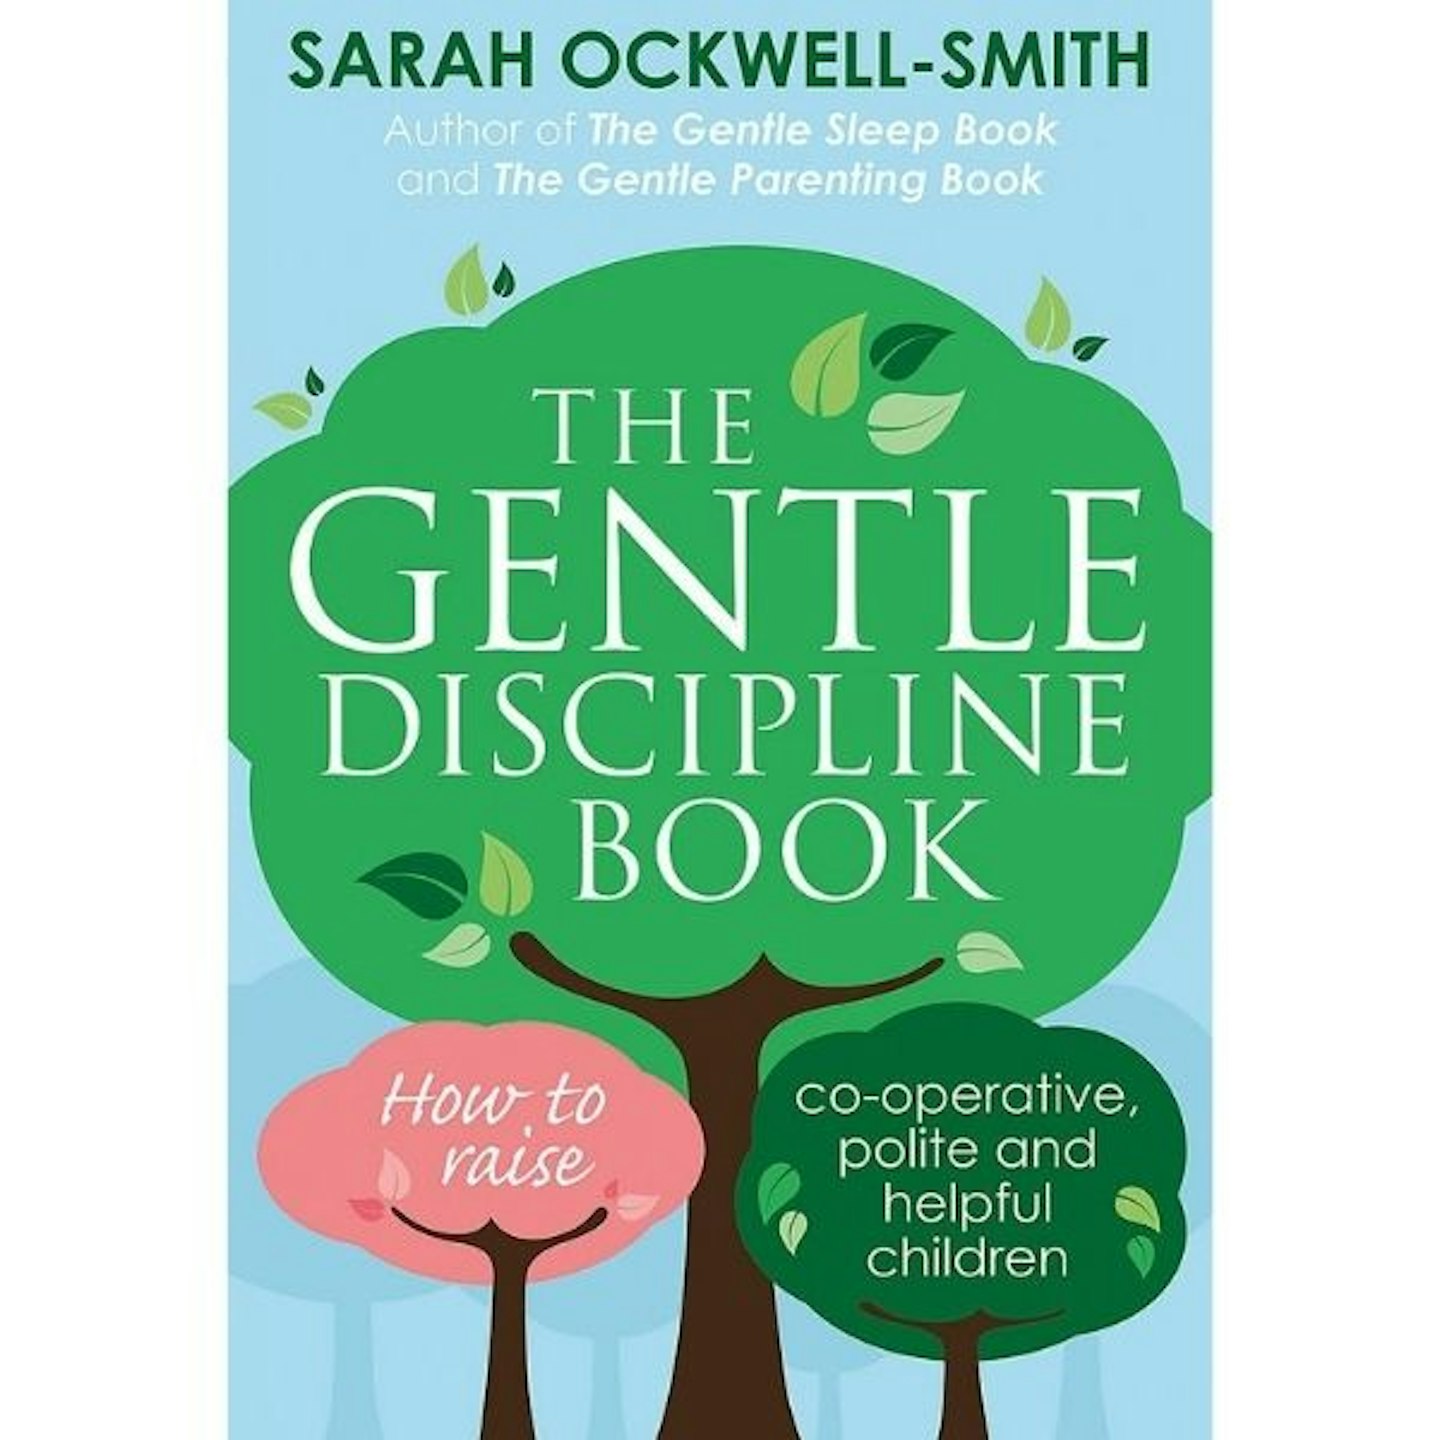 The Gentle Discipline Book, By Sarah Ockwell-Smith